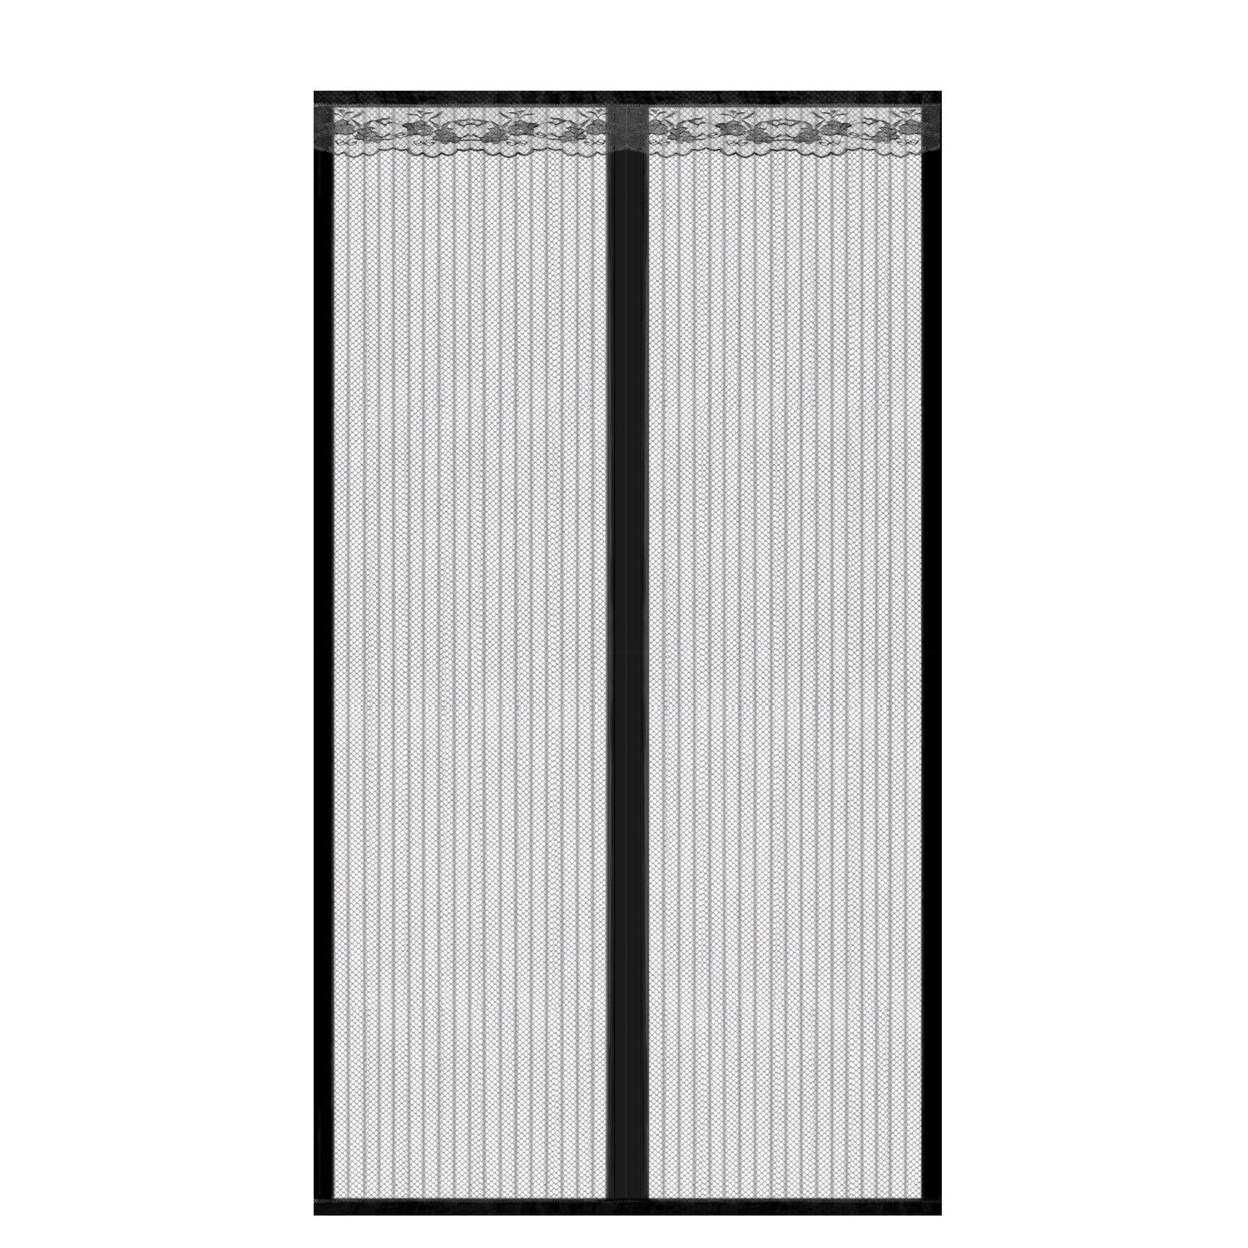 SKUSHOPS Magnetic Mesh Curtain Hands-free Fly Mesh Door Curtain